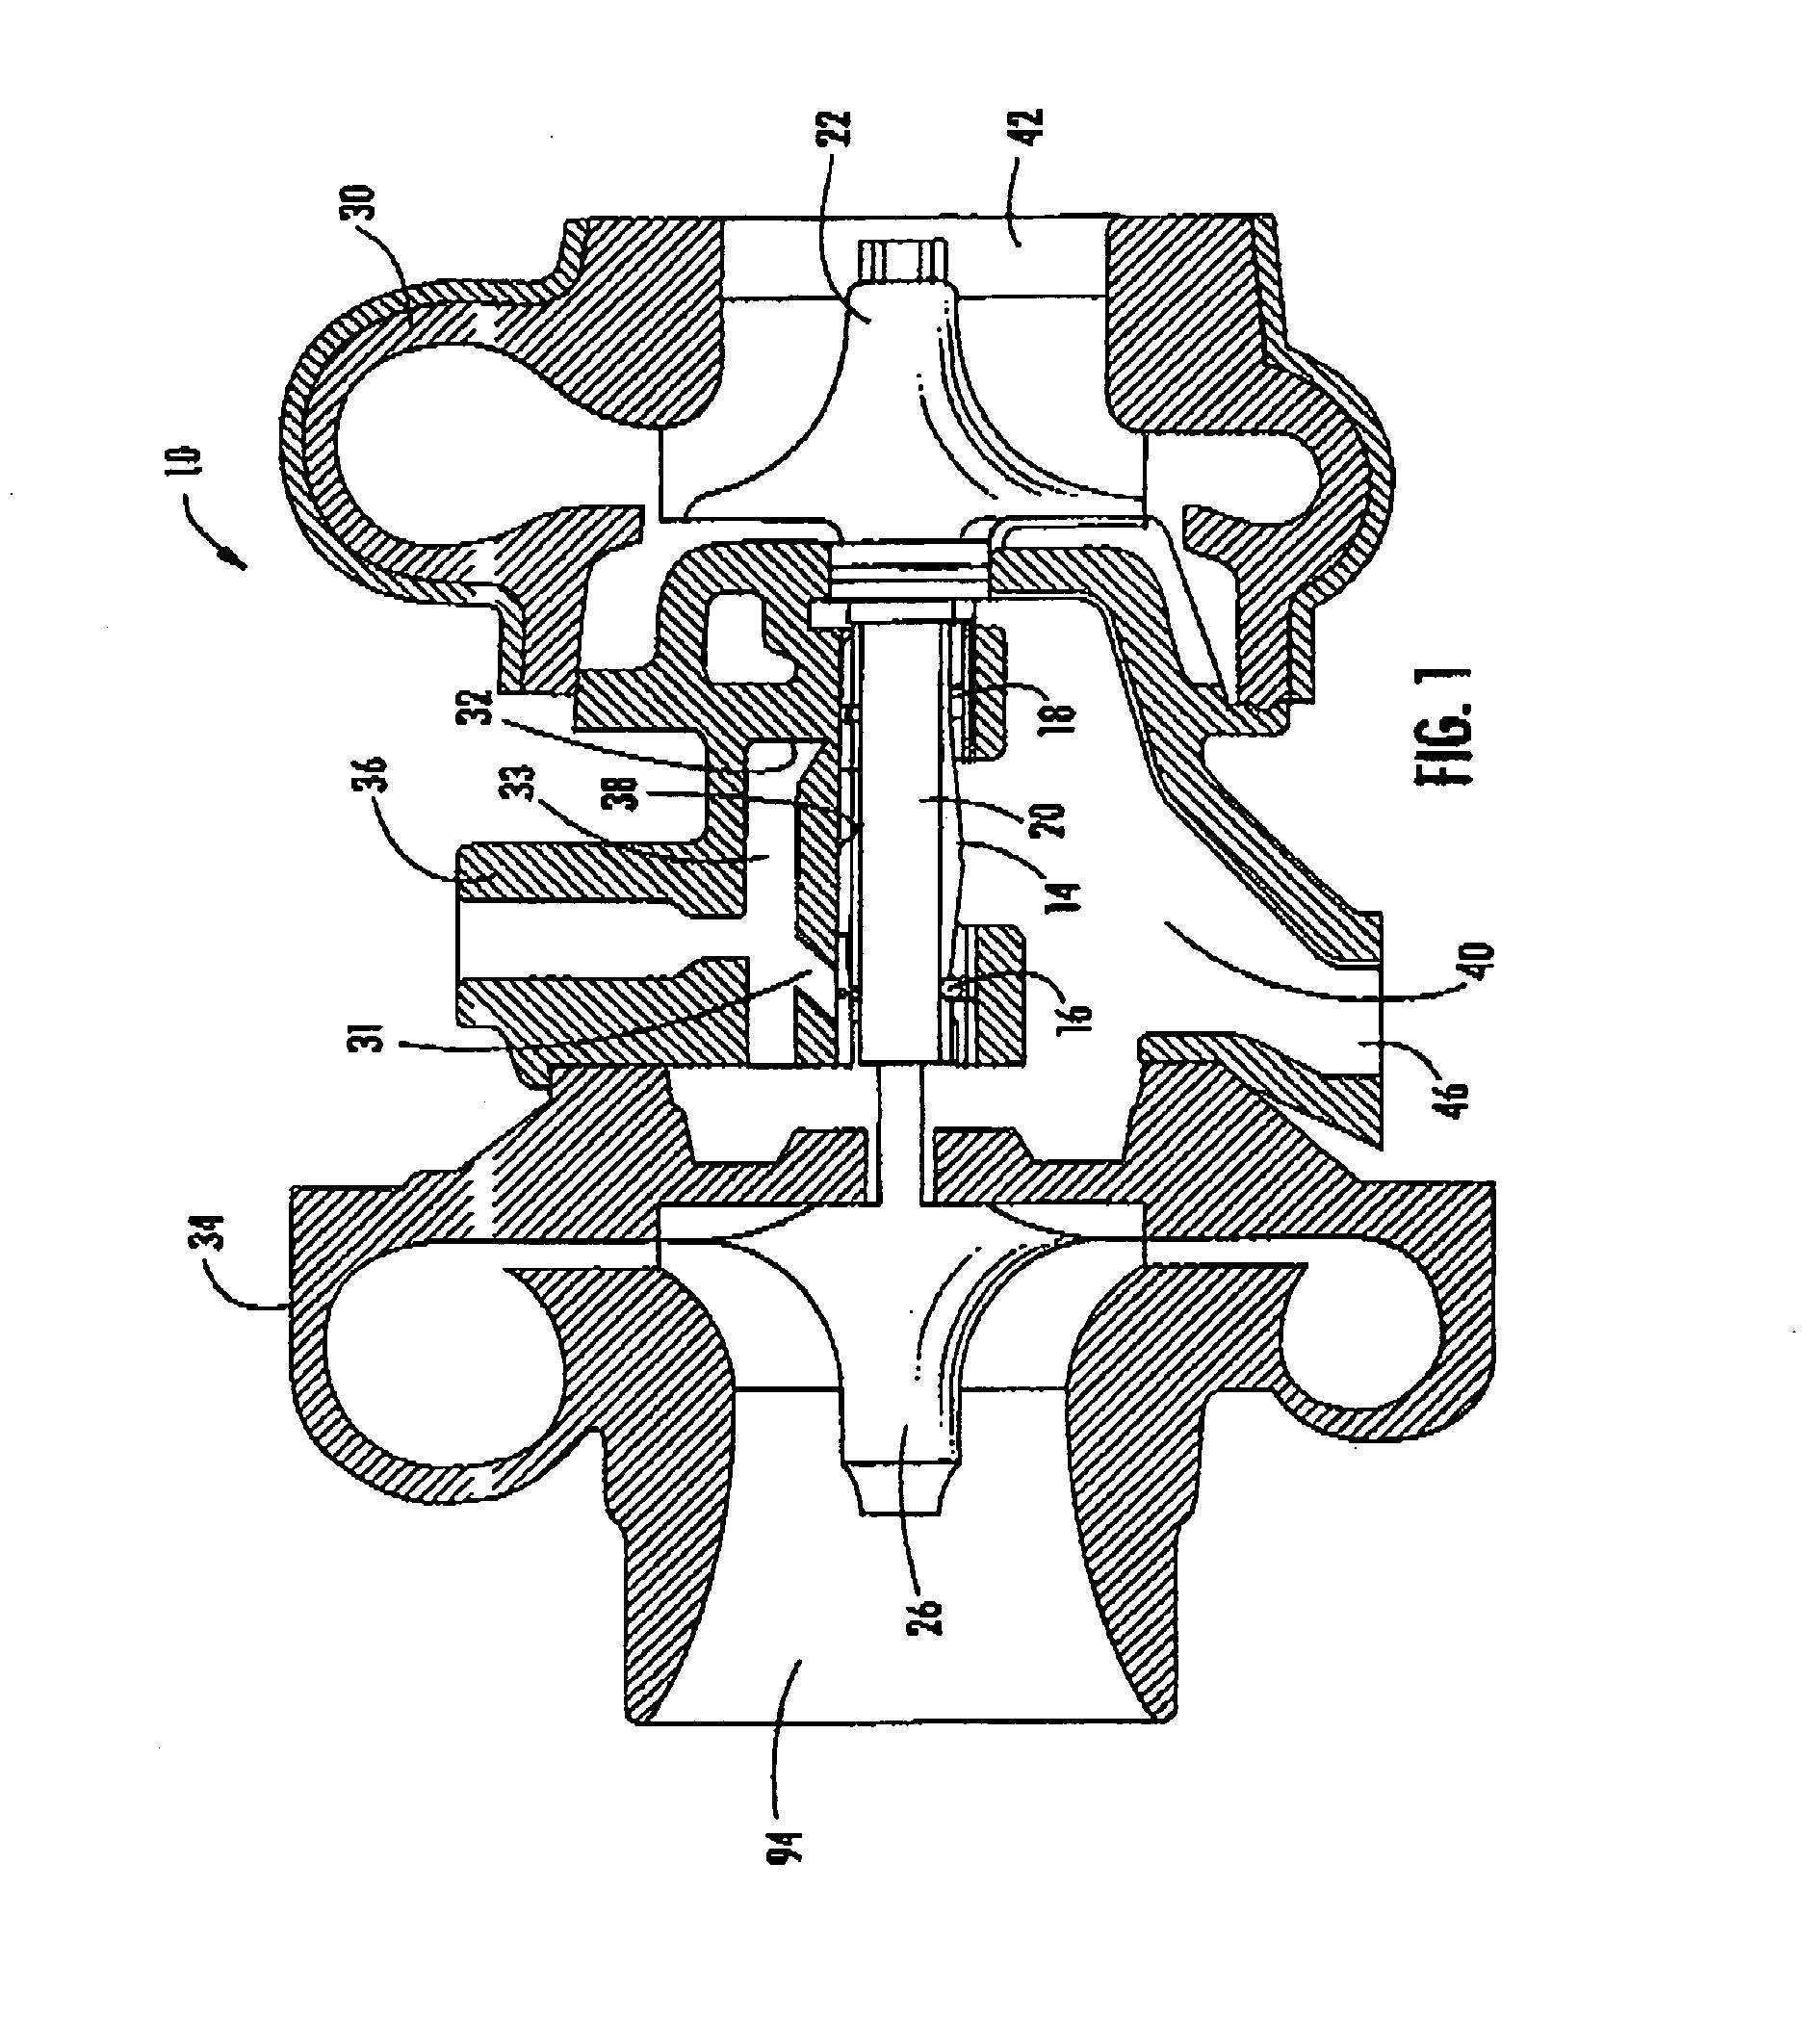 Bearing system for a turbocharger